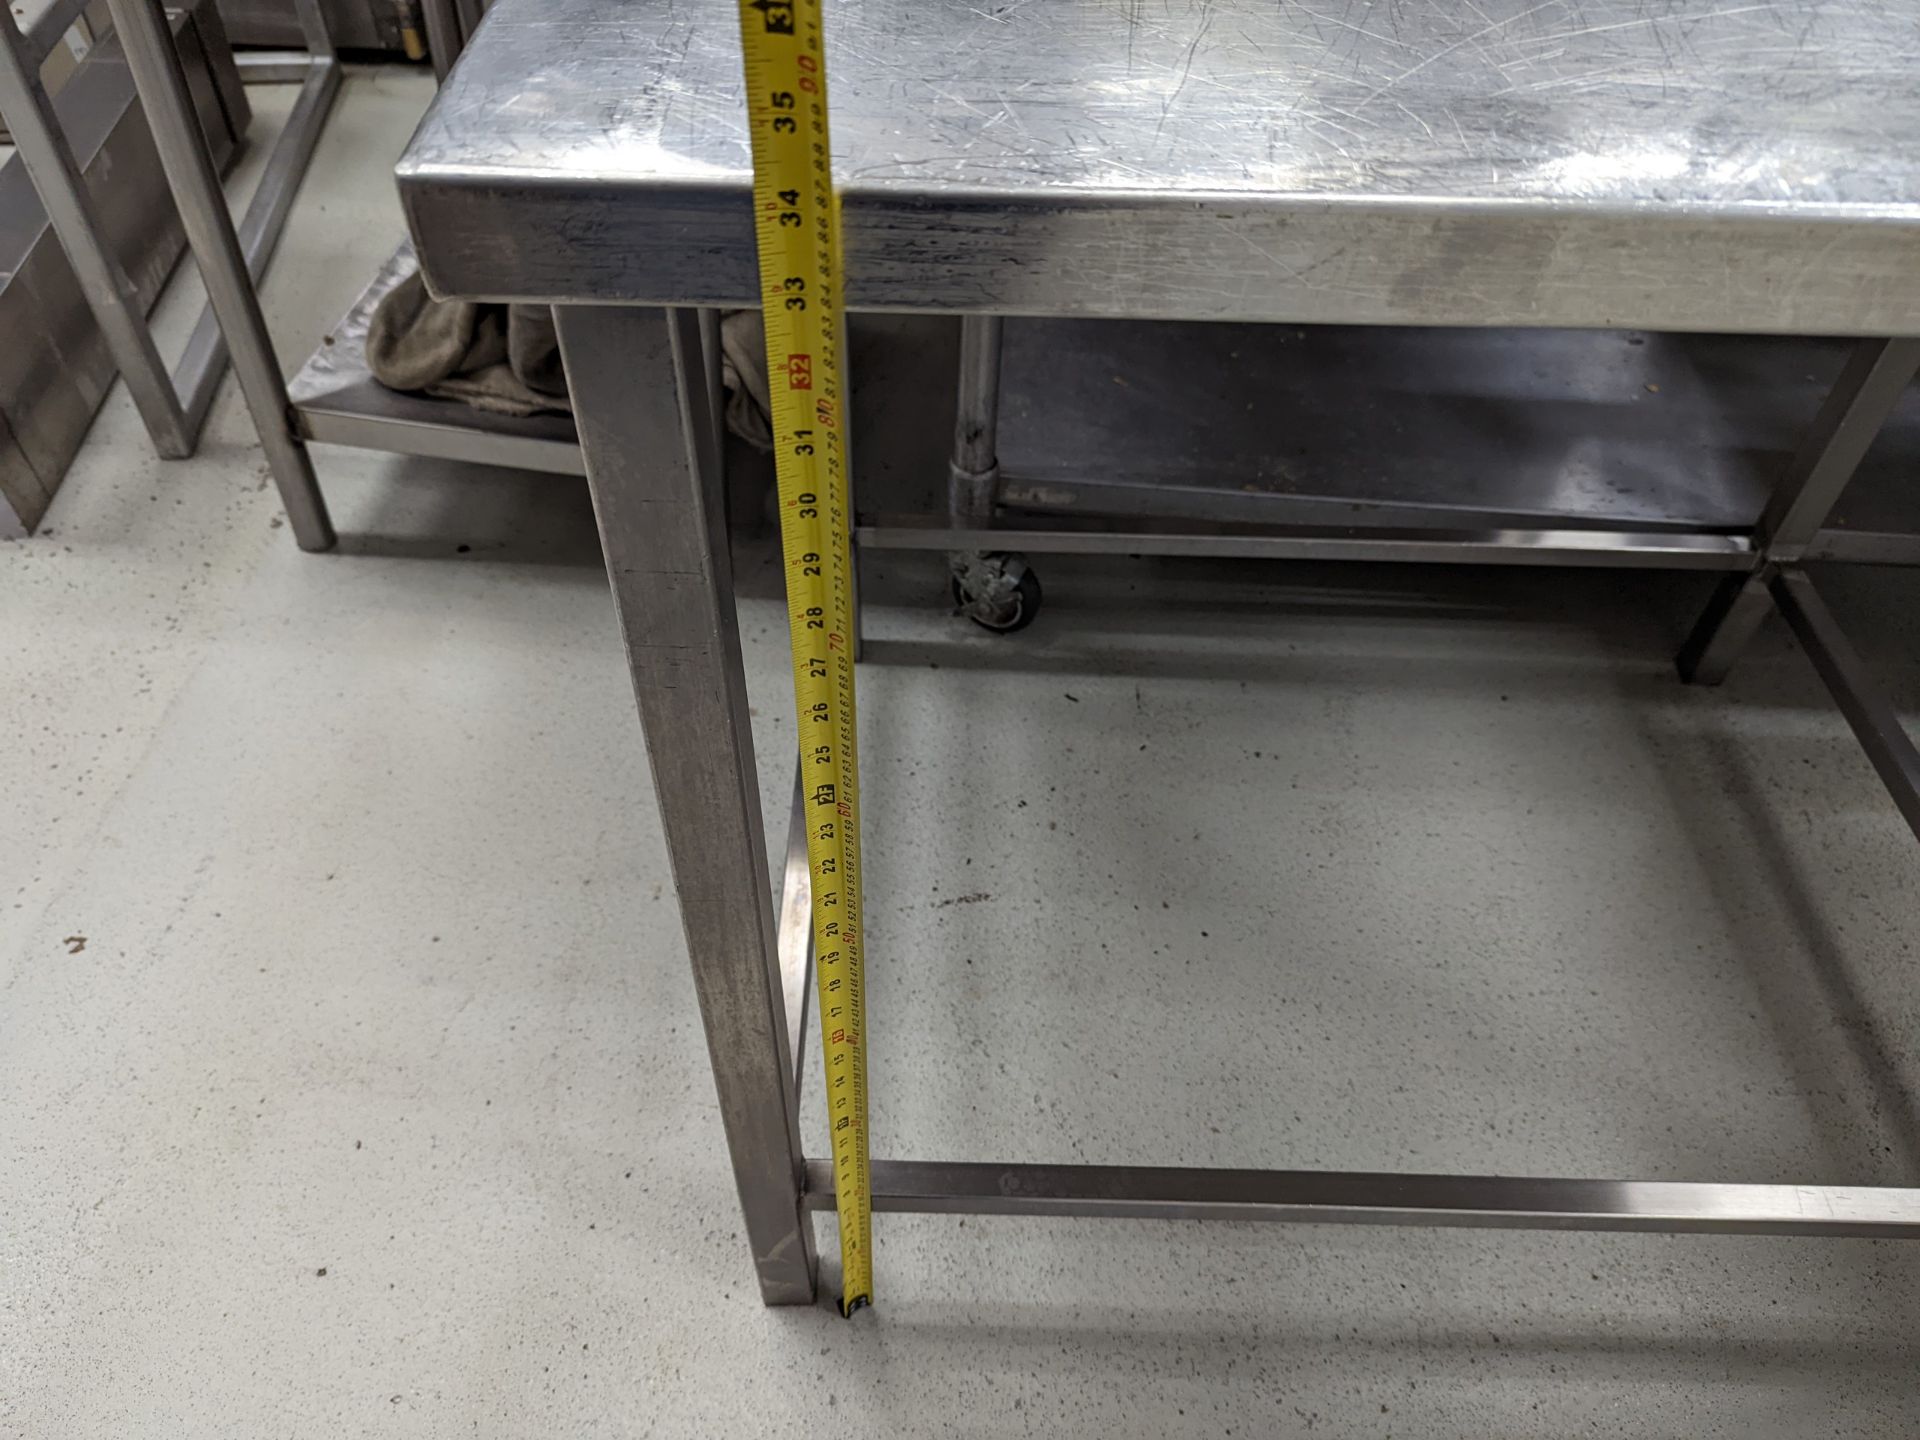 Stainless Table, 40Lx30Wx34H - Image 4 of 4